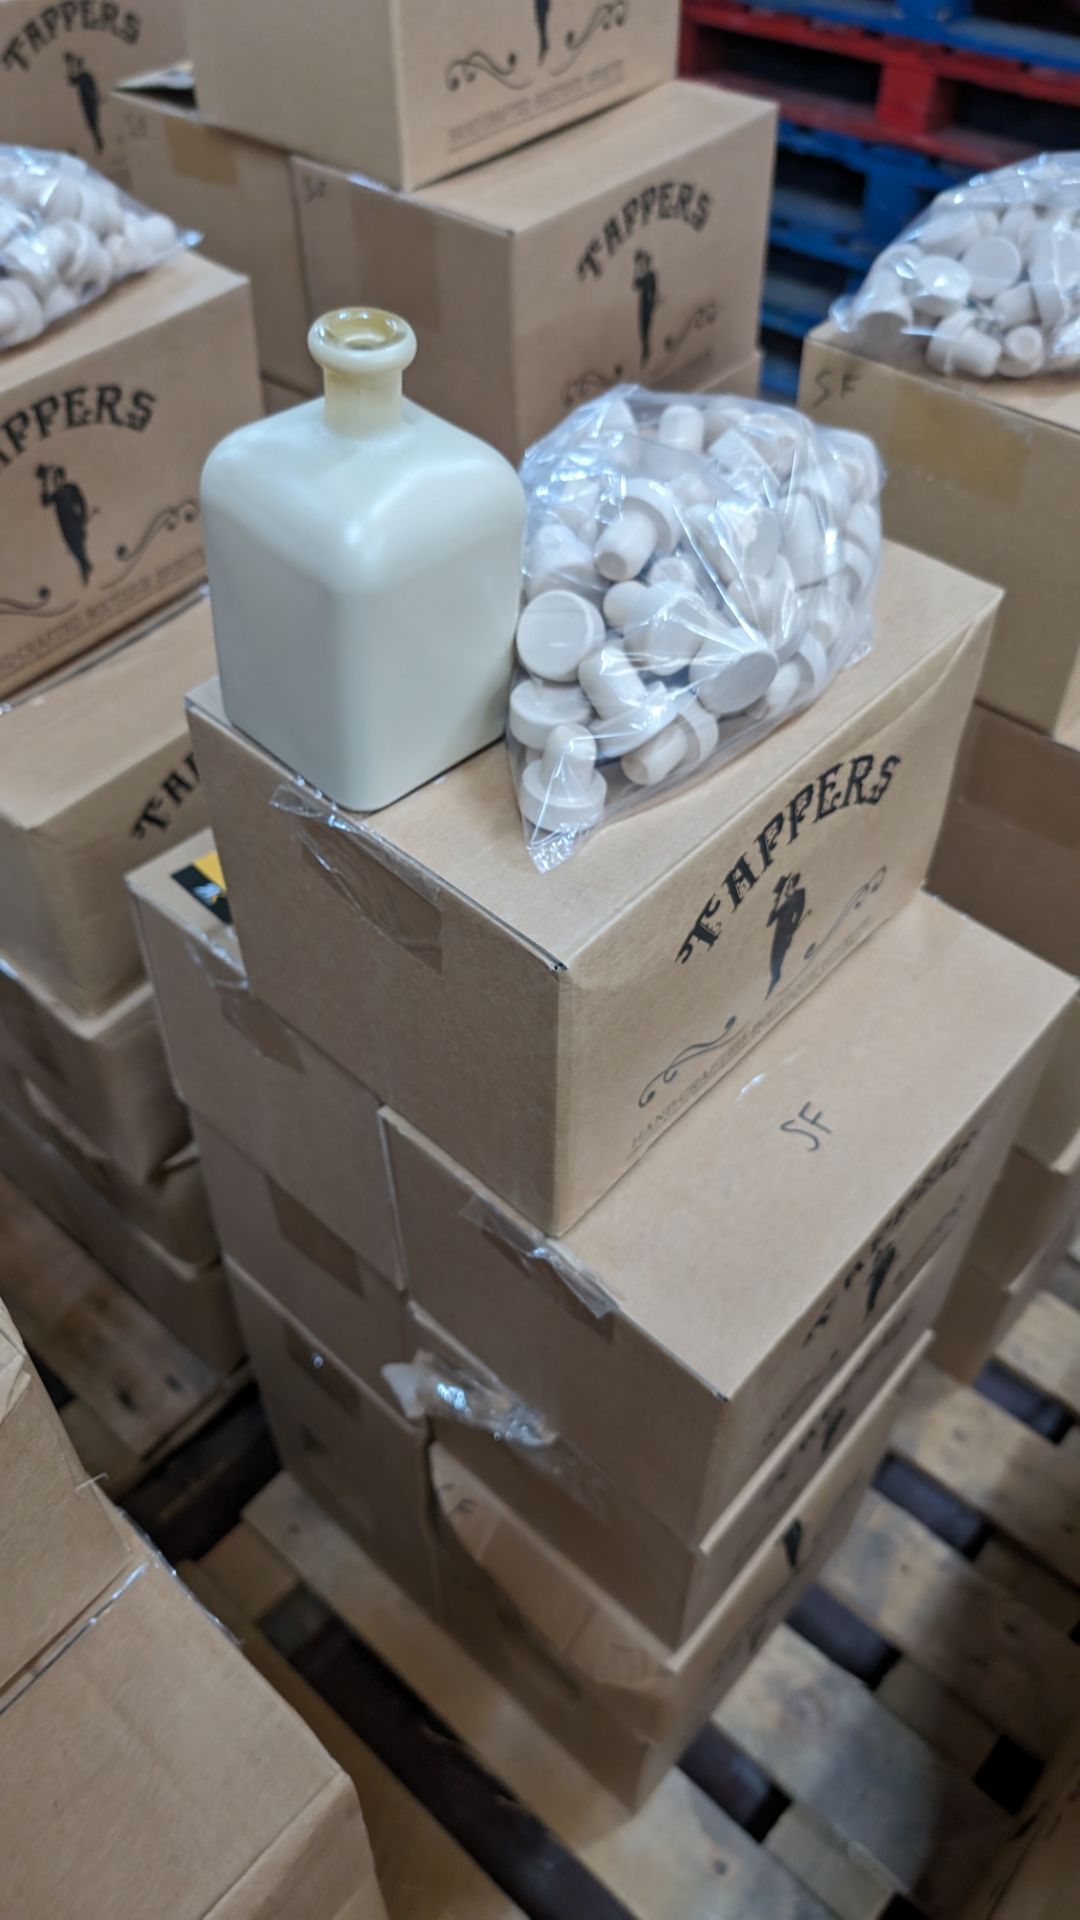 54 off 50cl/500ml professionally painted cream glass bottles, each including a stopper. The bottles